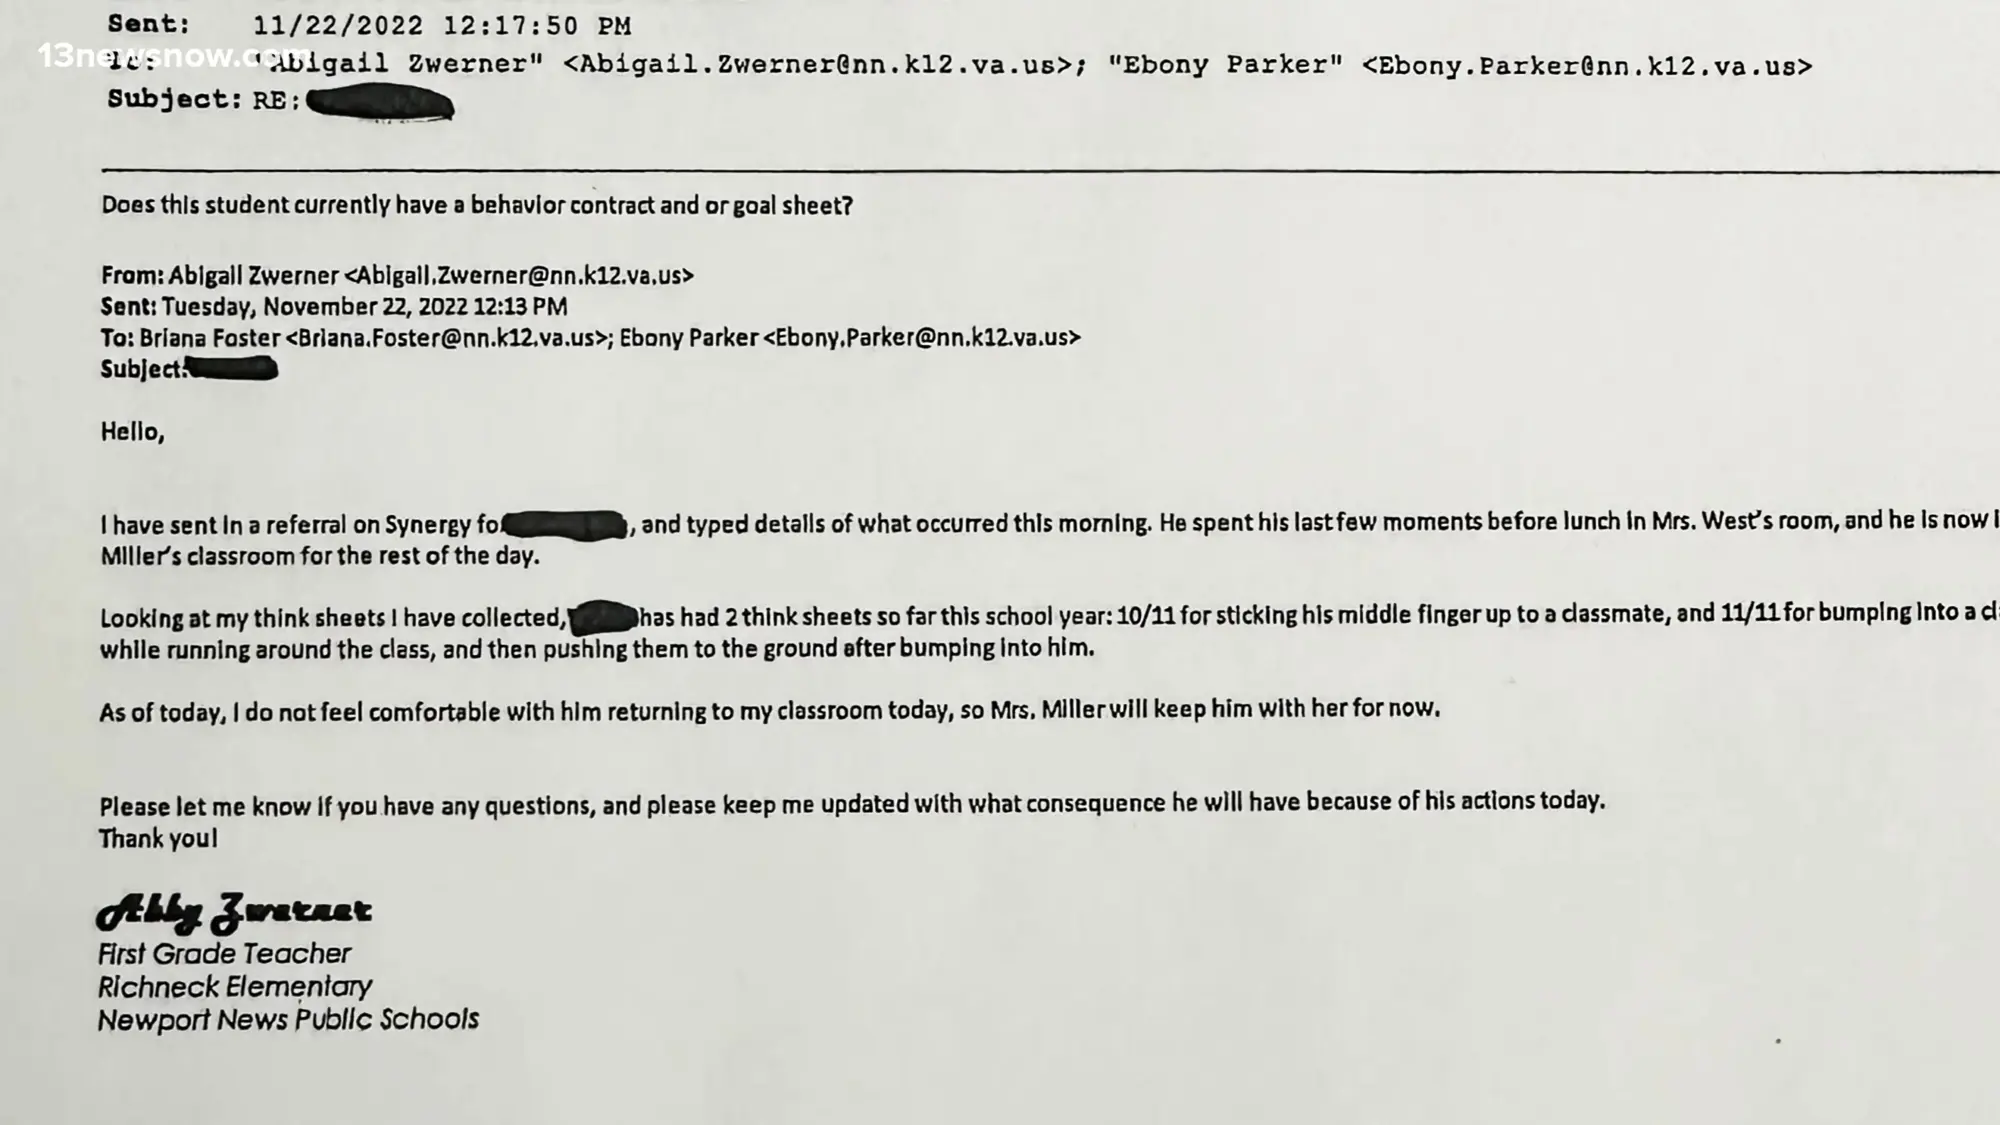 Abigail Zwerner emails complaining about 6 year old boy's behavior